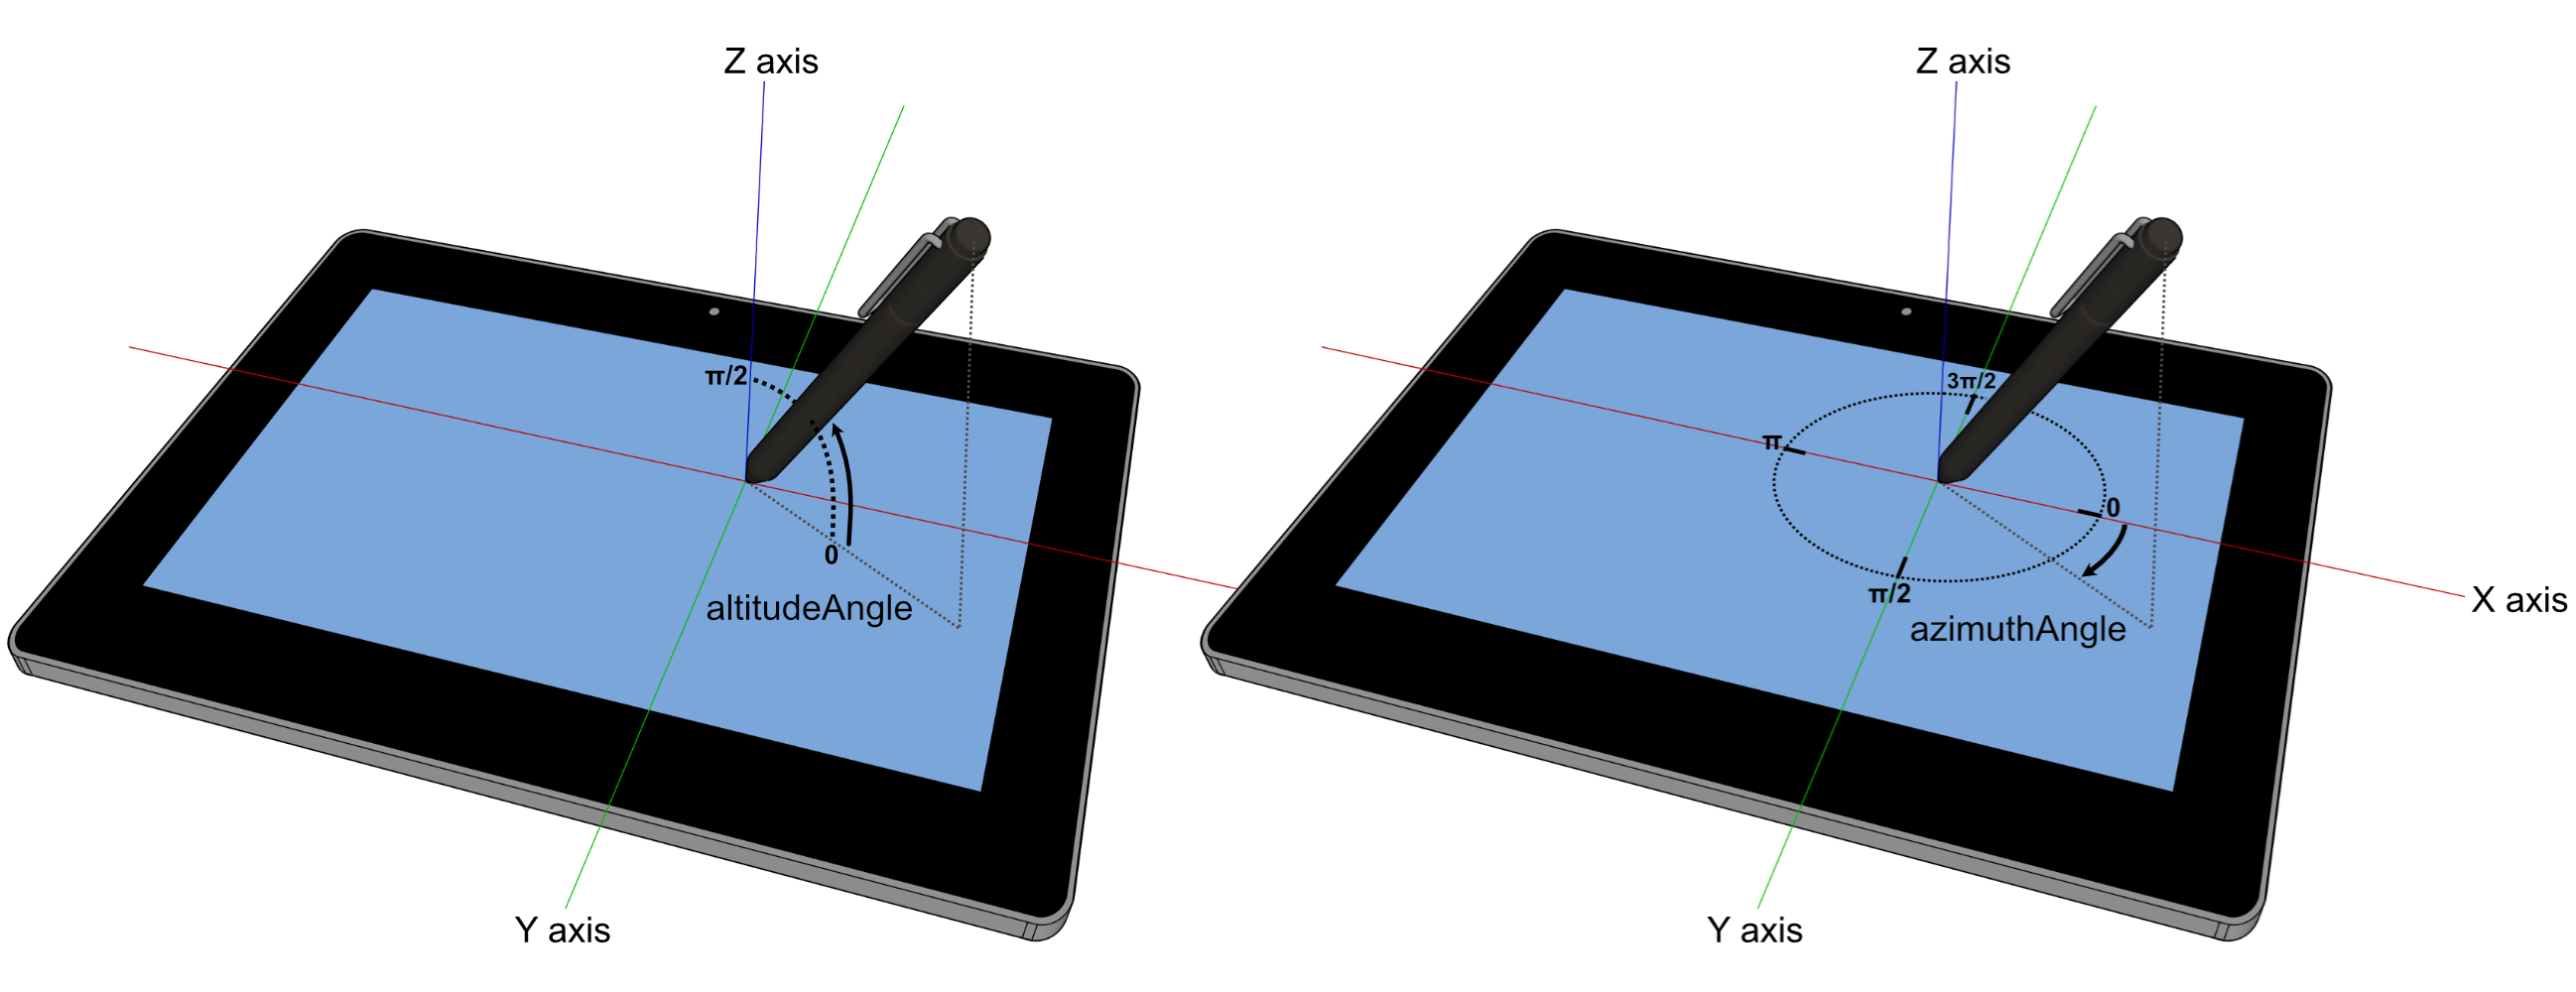 Illustrations visualising altitudeAngle and azimuthAngle, in the context of a tablet with a stylus